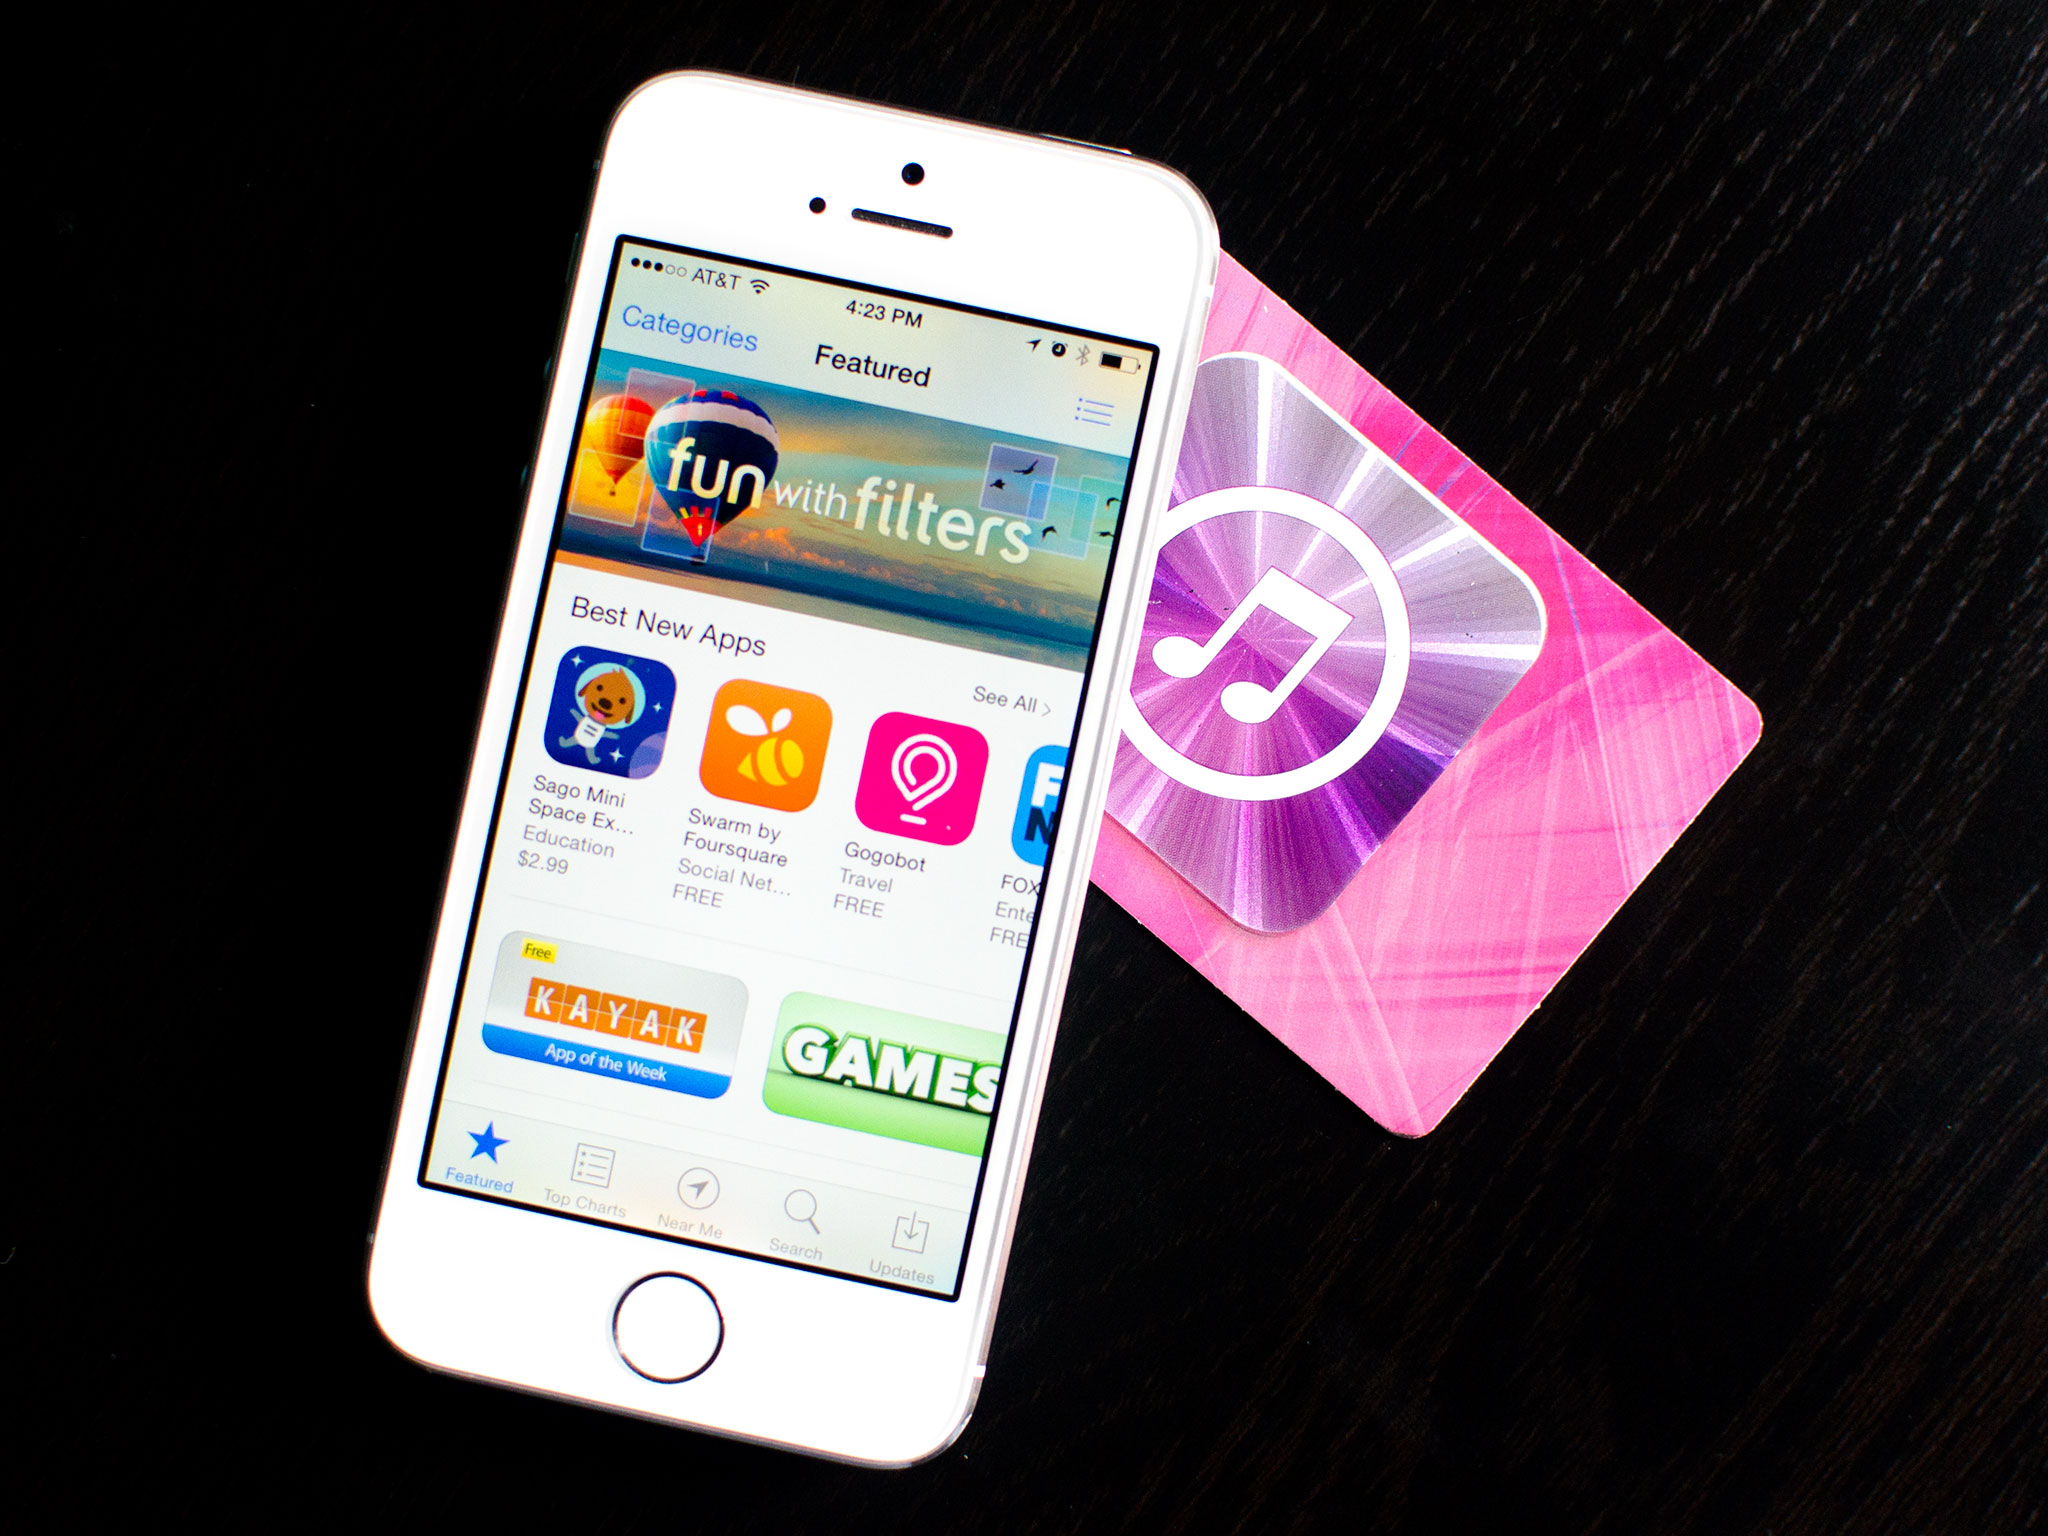 How to redeem gift cards and app promo codes straight from your iPhone and iPad